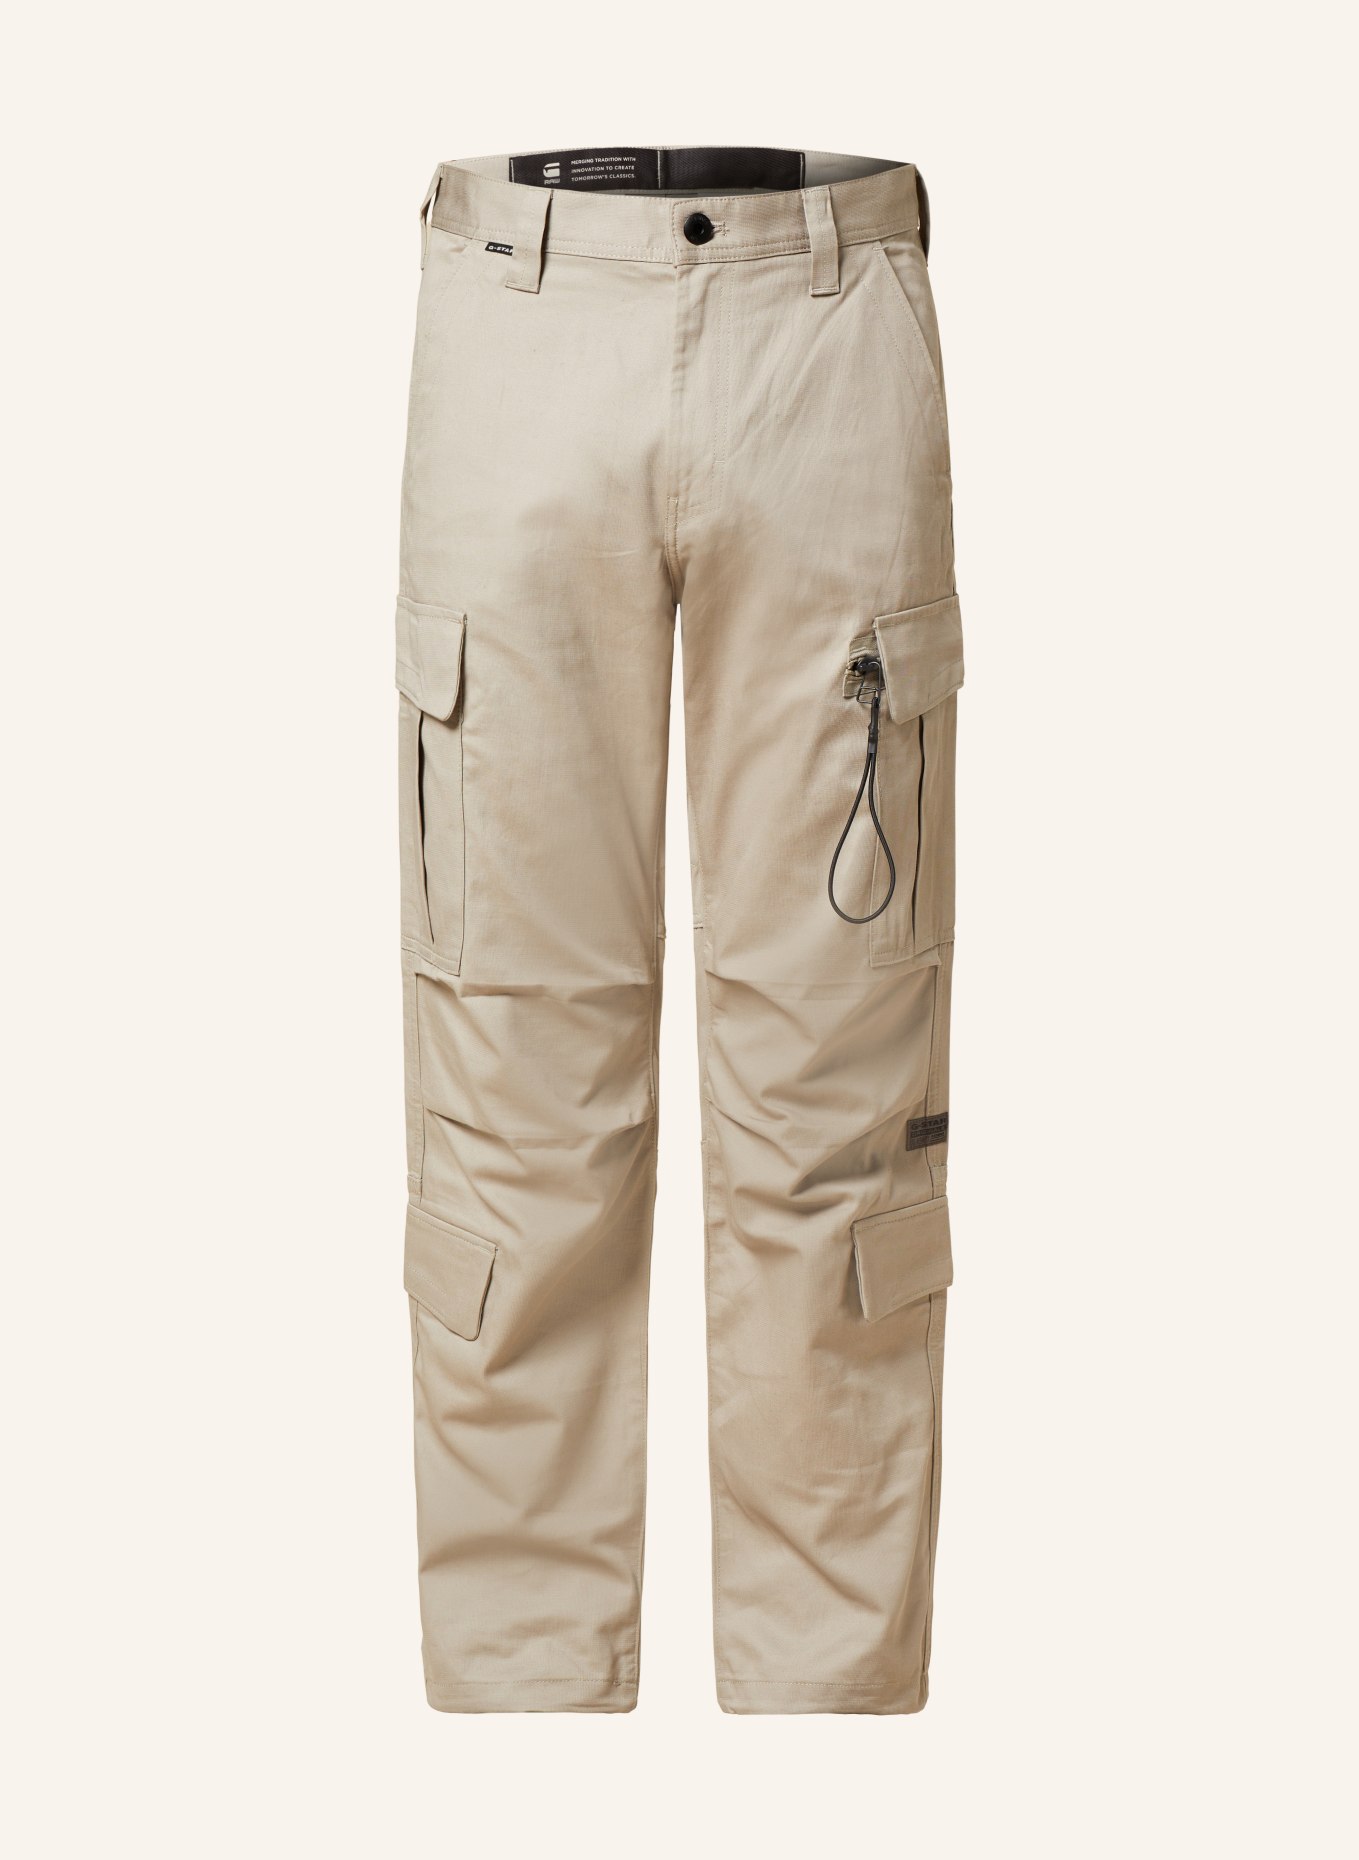 CLESALE Cargo Pants Plus Size Solid Color Softy Work Pants India | Ubuy